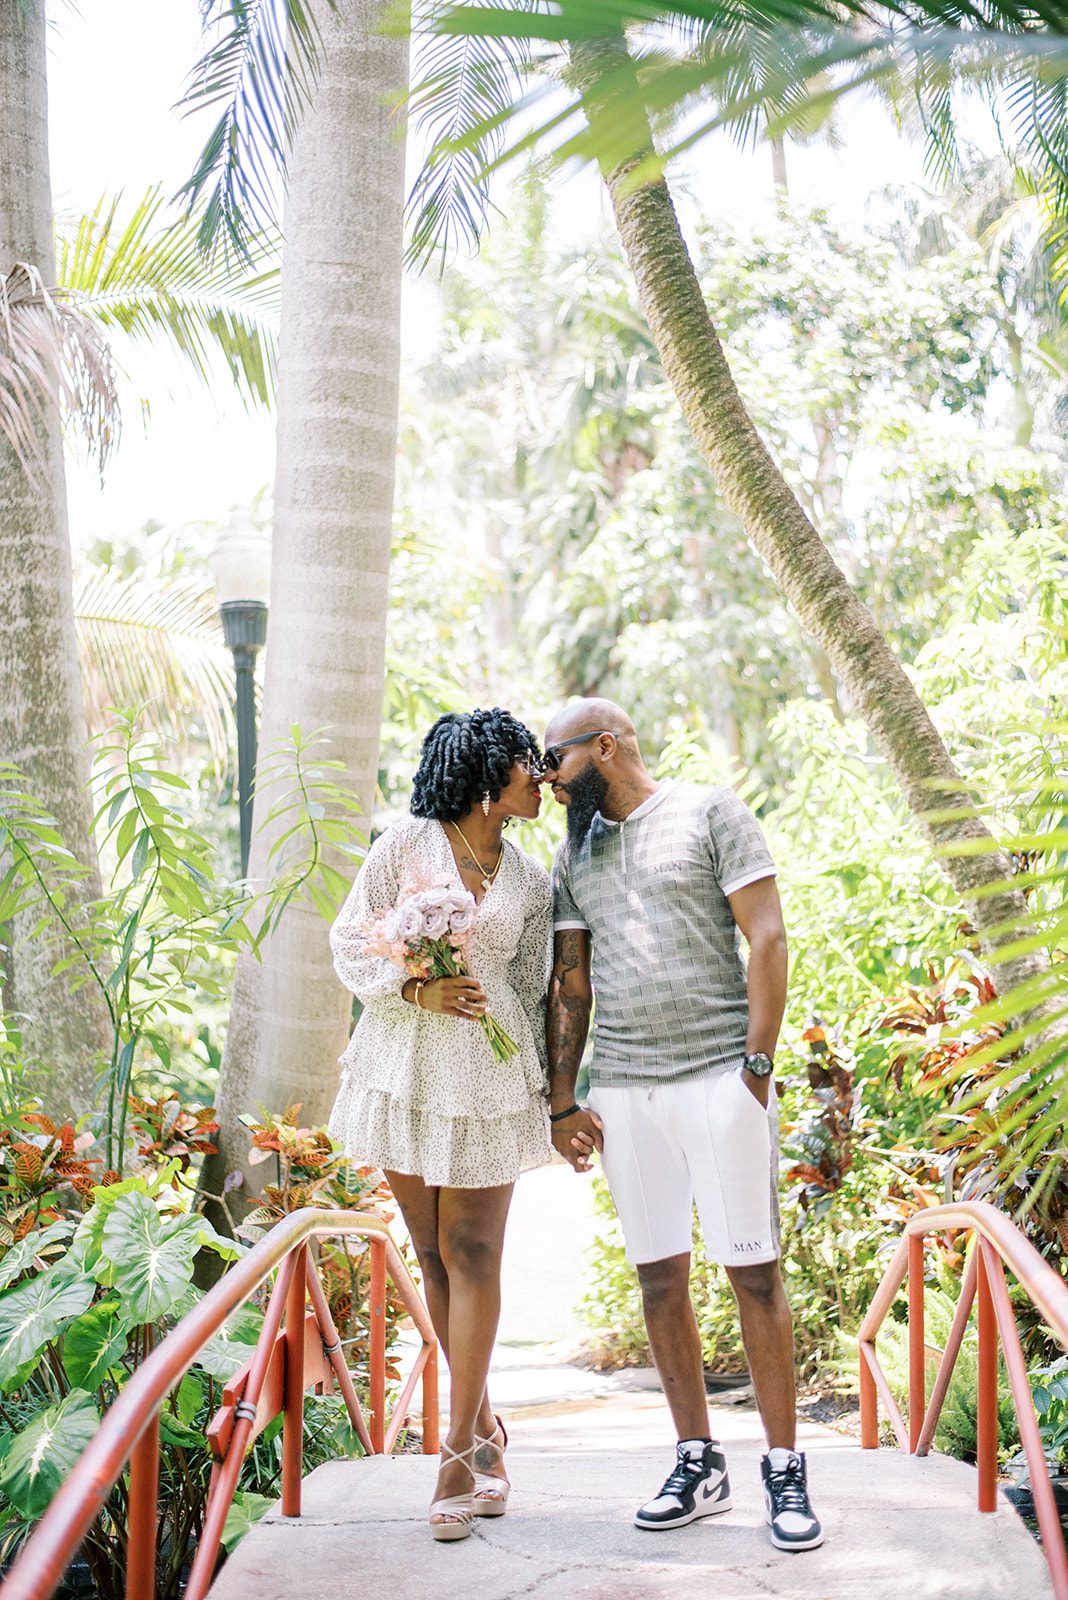 Tampa Florida engagement session with man and woman holding hands and walking over a bridge in a lush tropical garden